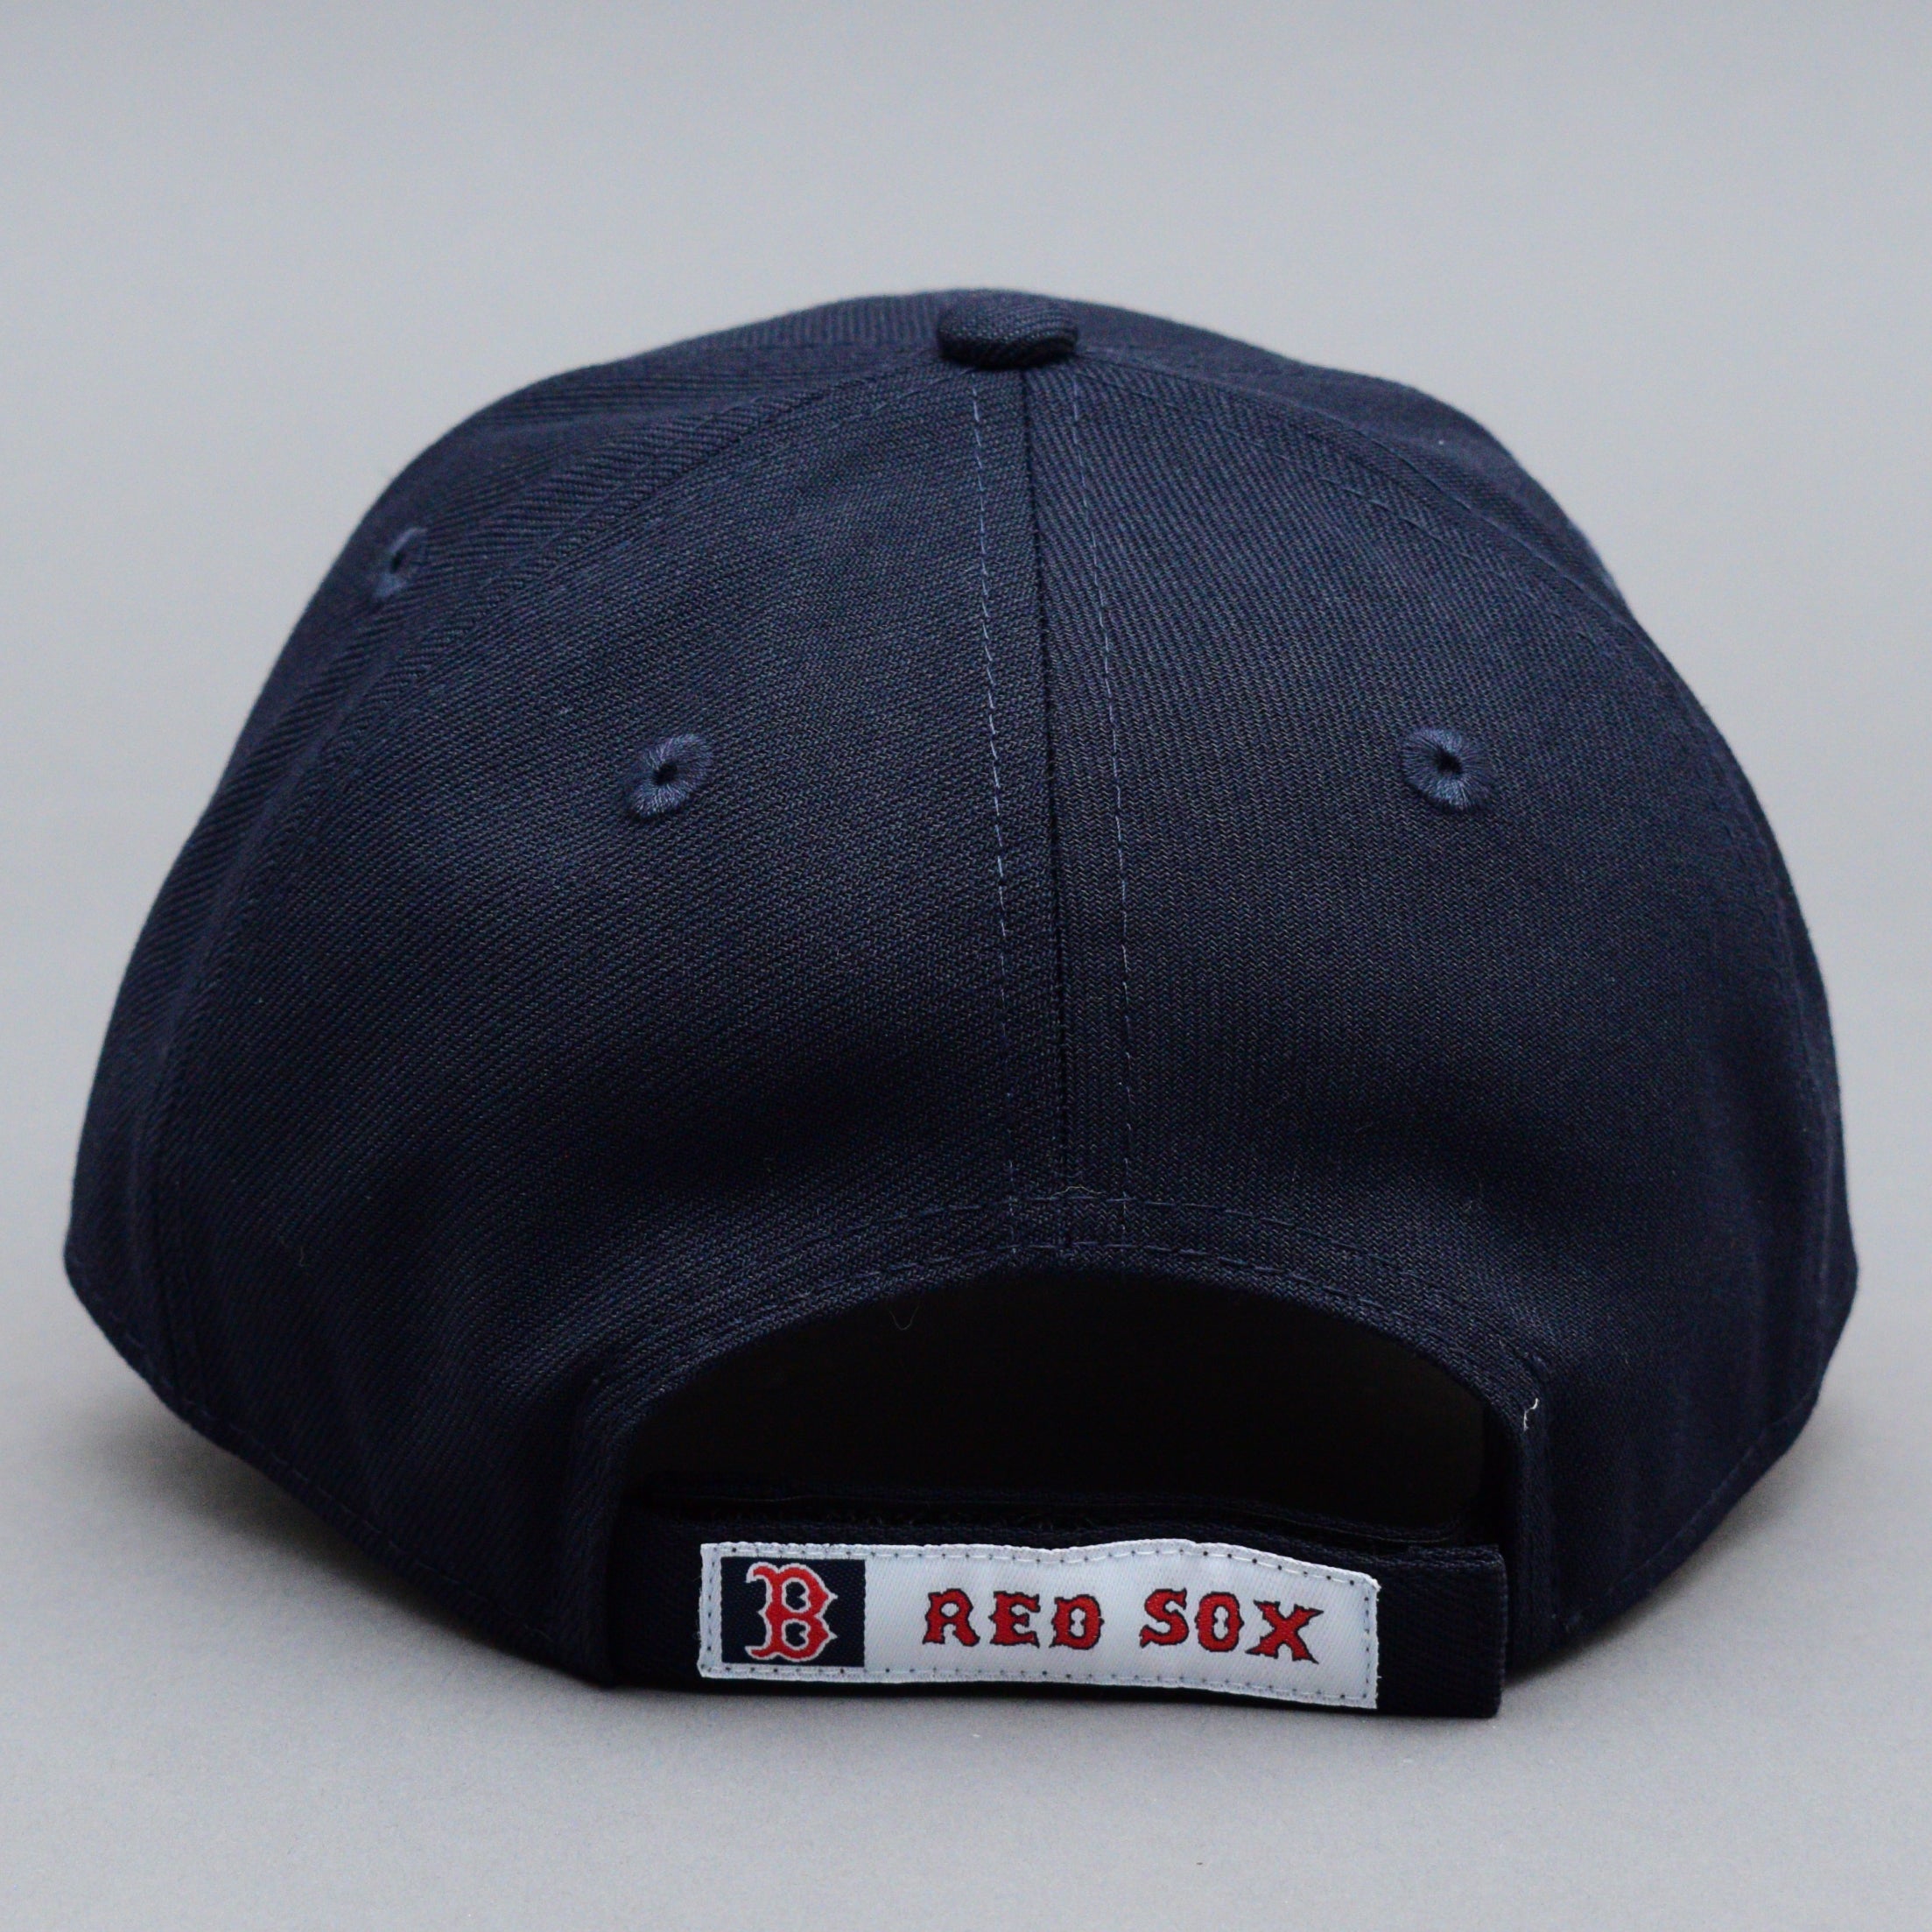 New Era - Boston Red Sox 9Forty The League - Adjustable - Navy